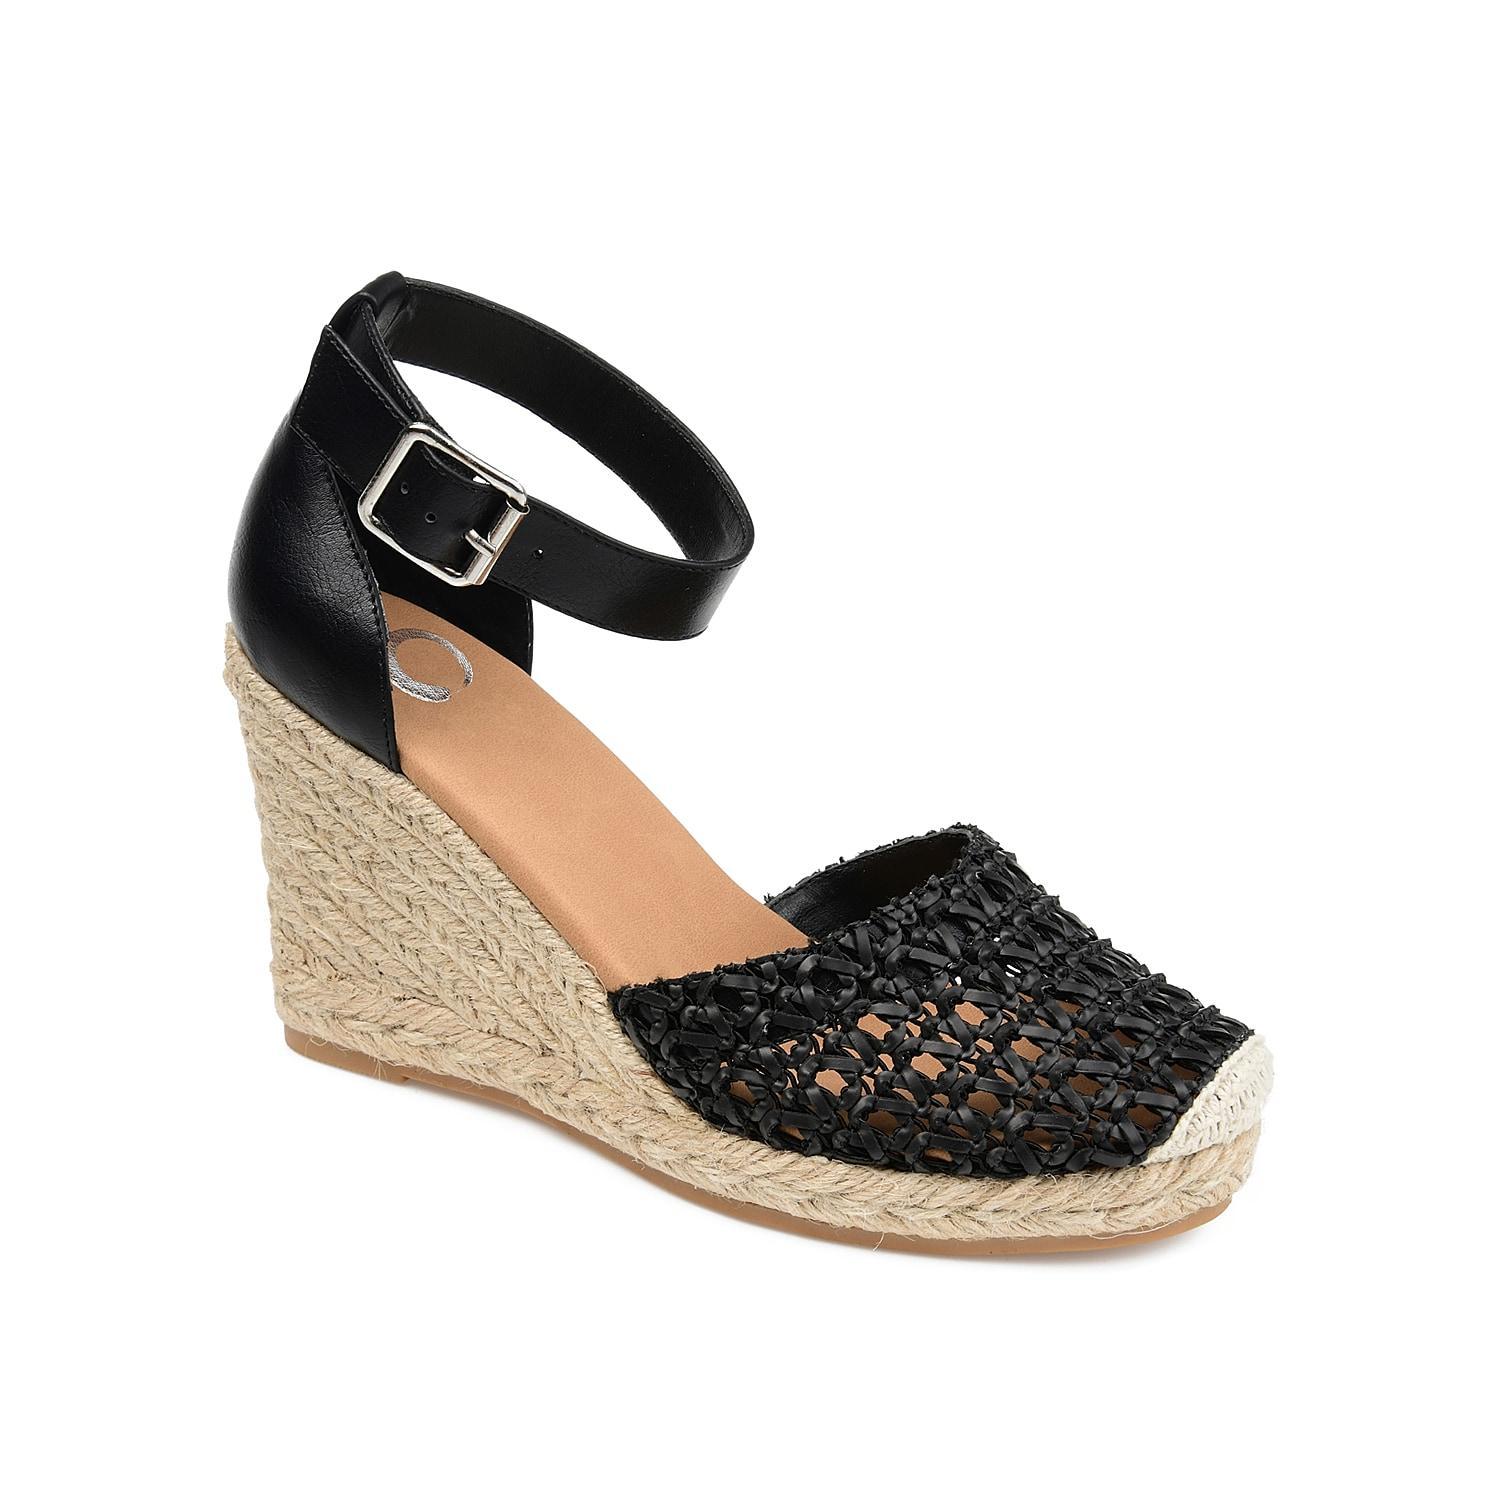 Journee Collection Sierra Womens Wedge Sandals Black Product Image